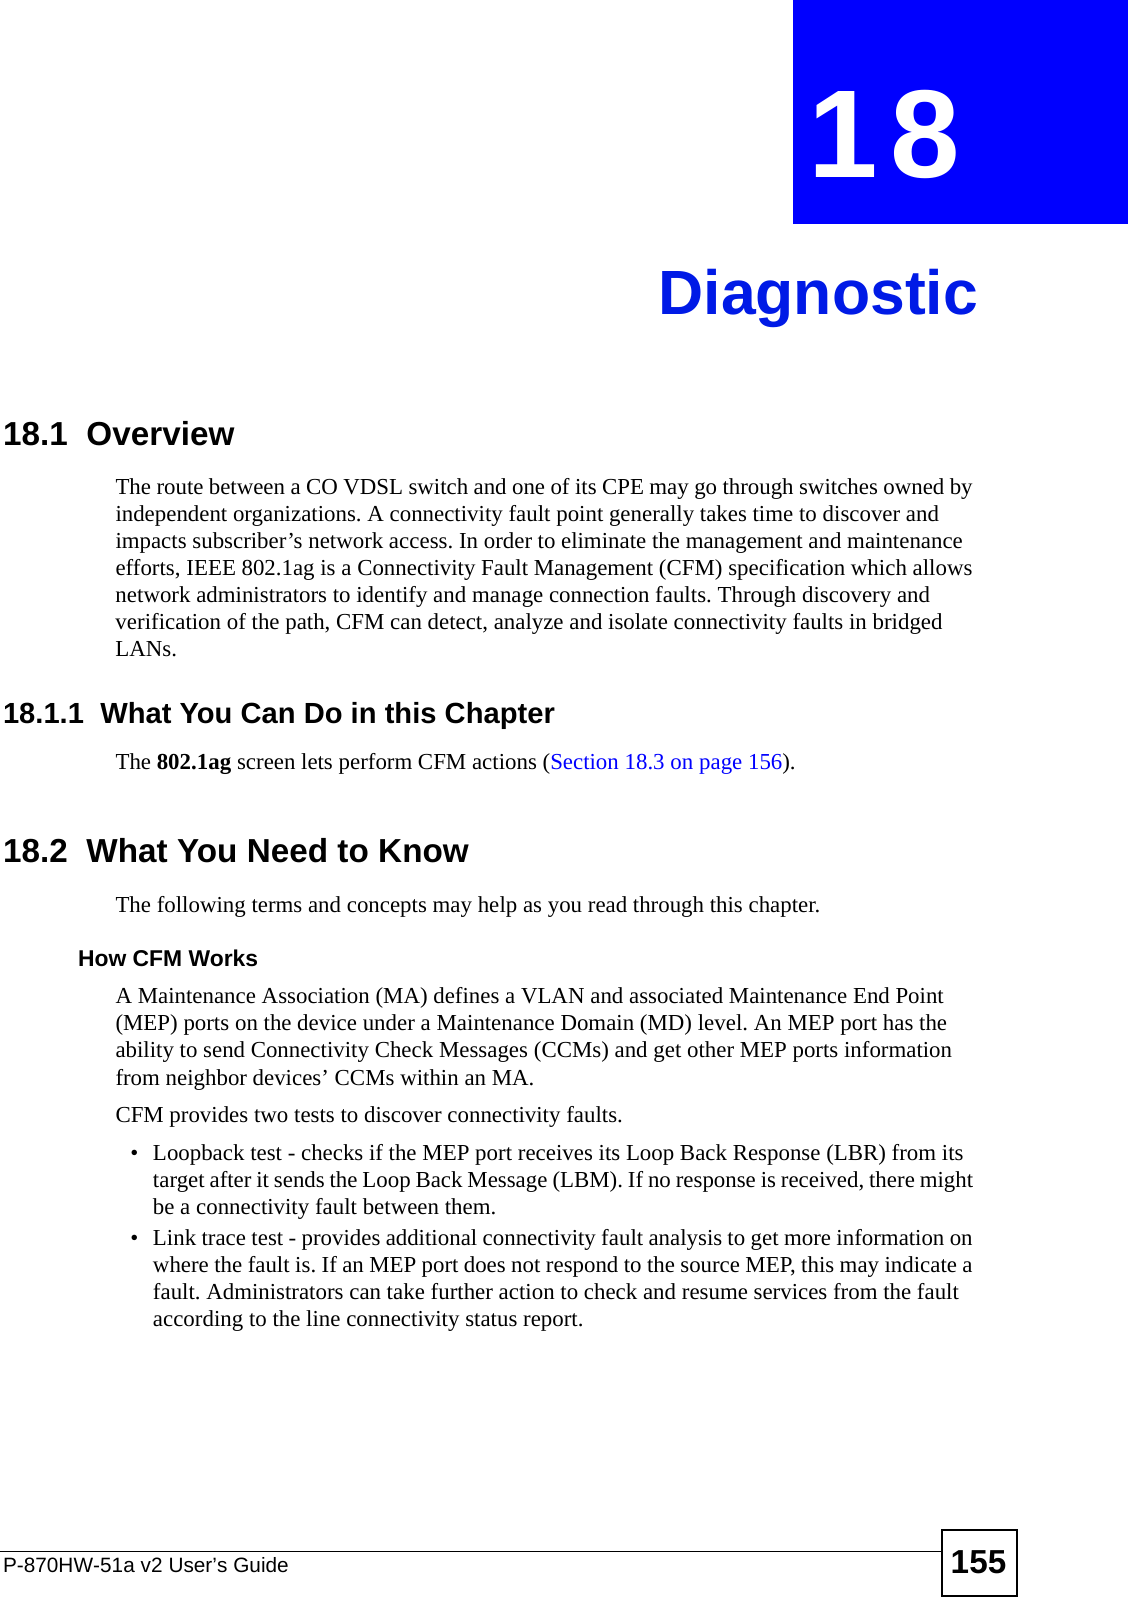 P-870HW-51a v2 User’s Guide 155CHAPTER  18 Diagnostic18.1  OverviewThe route between a CO VDSL switch and one of its CPE may go through switches owned by independent organizations. A connectivity fault point generally takes time to discover and impacts subscriber’s network access. In order to eliminate the management and maintenance efforts, IEEE 802.1ag is a Connectivity Fault Management (CFM) specification which allows network administrators to identify and manage connection faults. Through discovery and verification of the path, CFM can detect, analyze and isolate connectivity faults in bridged LANs.18.1.1  What You Can Do in this ChapterThe 802.1ag screen lets perform CFM actions (Section 18.3 on page 156).18.2  What You Need to KnowThe following terms and concepts may help as you read through this chapter.How CFM Works A Maintenance Association (MA) defines a VLAN and associated Maintenance End Point (MEP) ports on the device under a Maintenance Domain (MD) level. An MEP port has the ability to send Connectivity Check Messages (CCMs) and get other MEP ports information from neighbor devices’ CCMs within an MA. CFM provides two tests to discover connectivity faults. • Loopback test - checks if the MEP port receives its Loop Back Response (LBR) from its target after it sends the Loop Back Message (LBM). If no response is received, there might be a connectivity fault between them. • Link trace test - provides additional connectivity fault analysis to get more information on where the fault is. If an MEP port does not respond to the source MEP, this may indicate a fault. Administrators can take further action to check and resume services from the fault according to the line connectivity status report. 